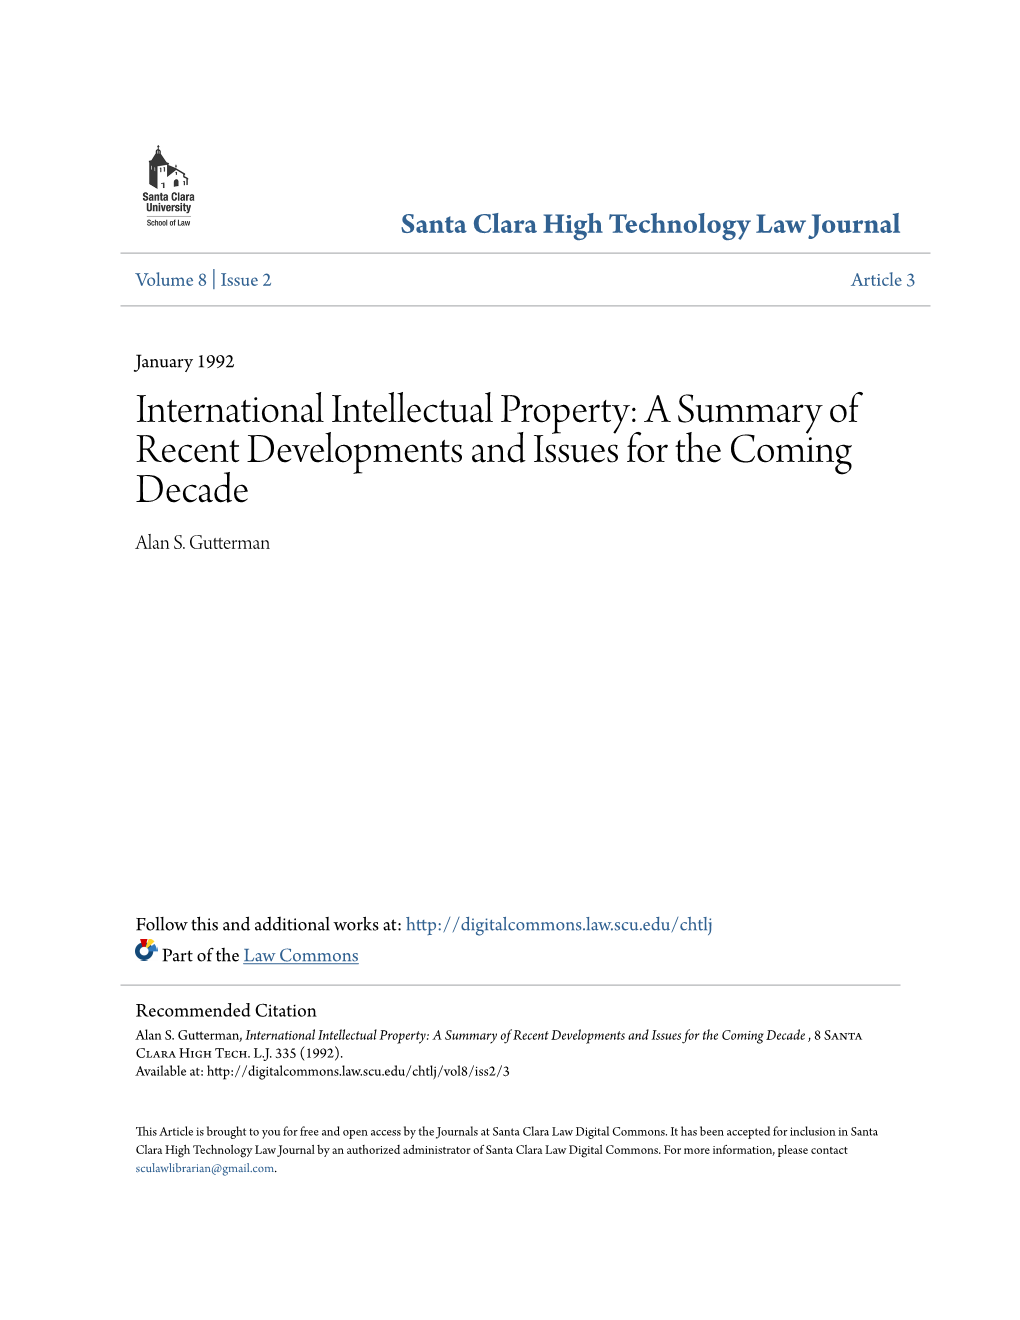 International Intellectual Property: a Summary of Recent Developments and Issues for the Coming Decade Alan S